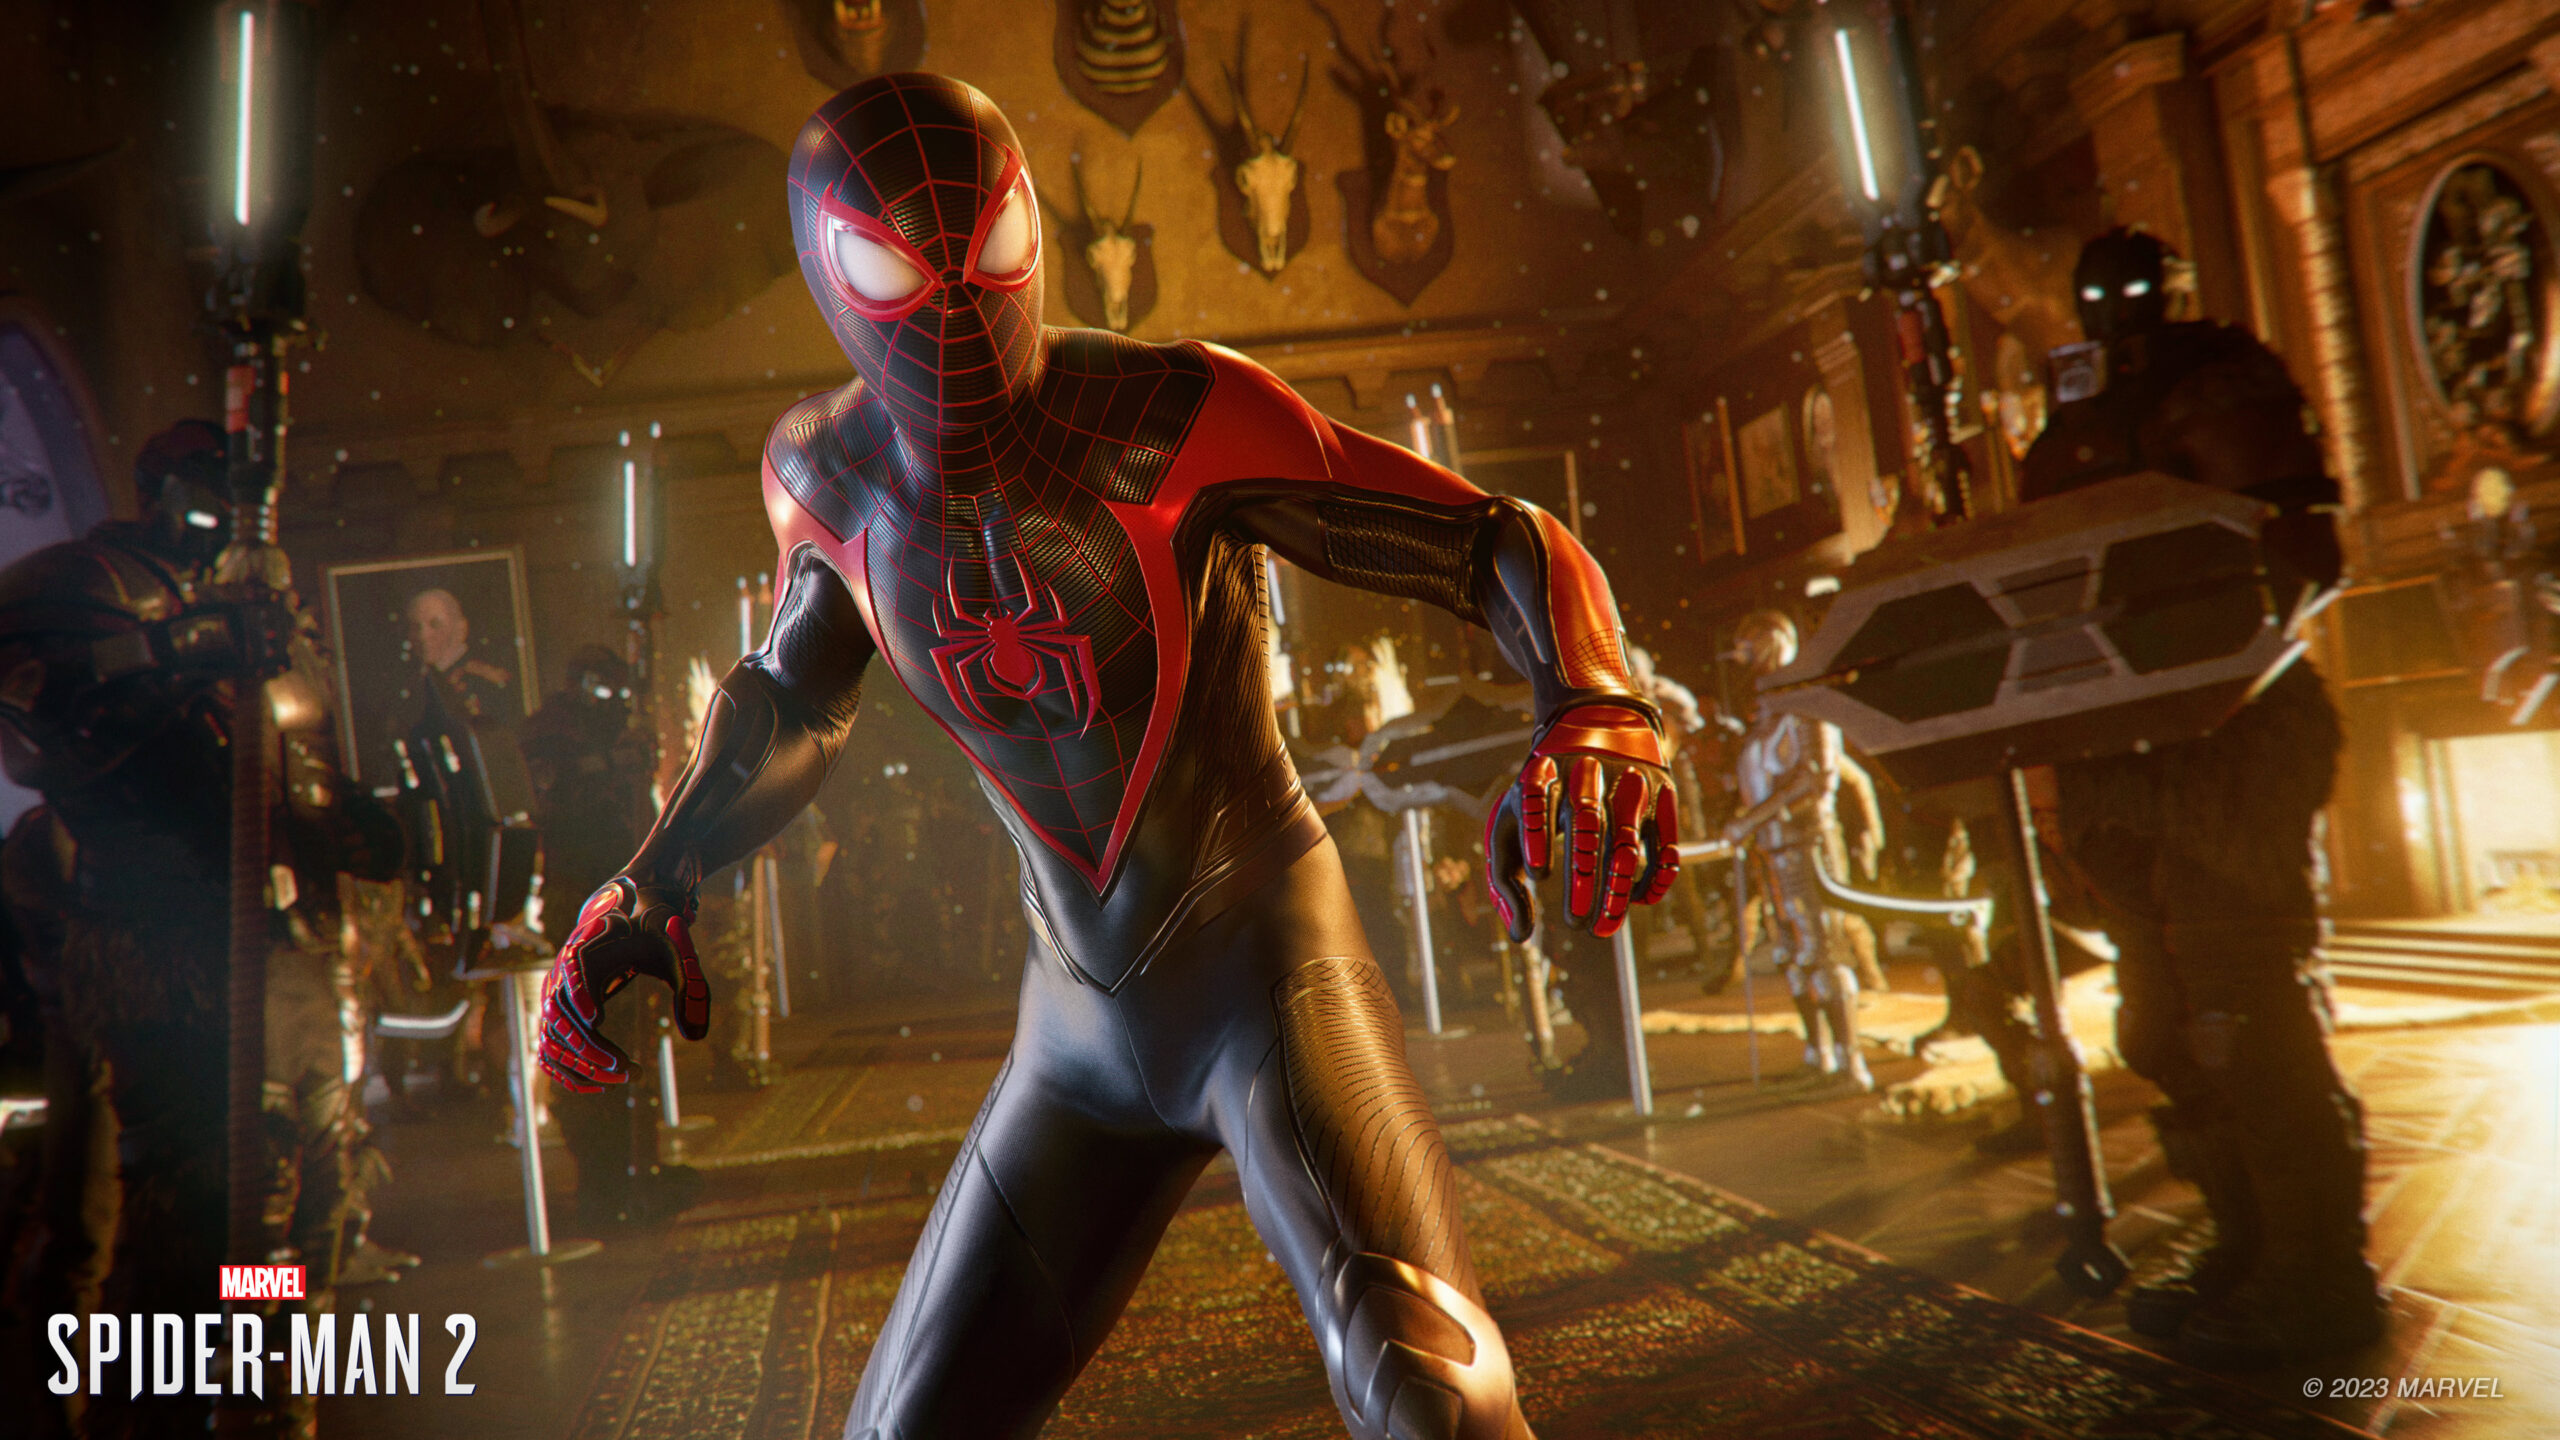 Press screenshot from Marvel's Spider-Man 2. A young man donning a head-to-toe suit with spider iconography stands in the middle of a museum exhibit, surrounded by heavily armed and geared figures.